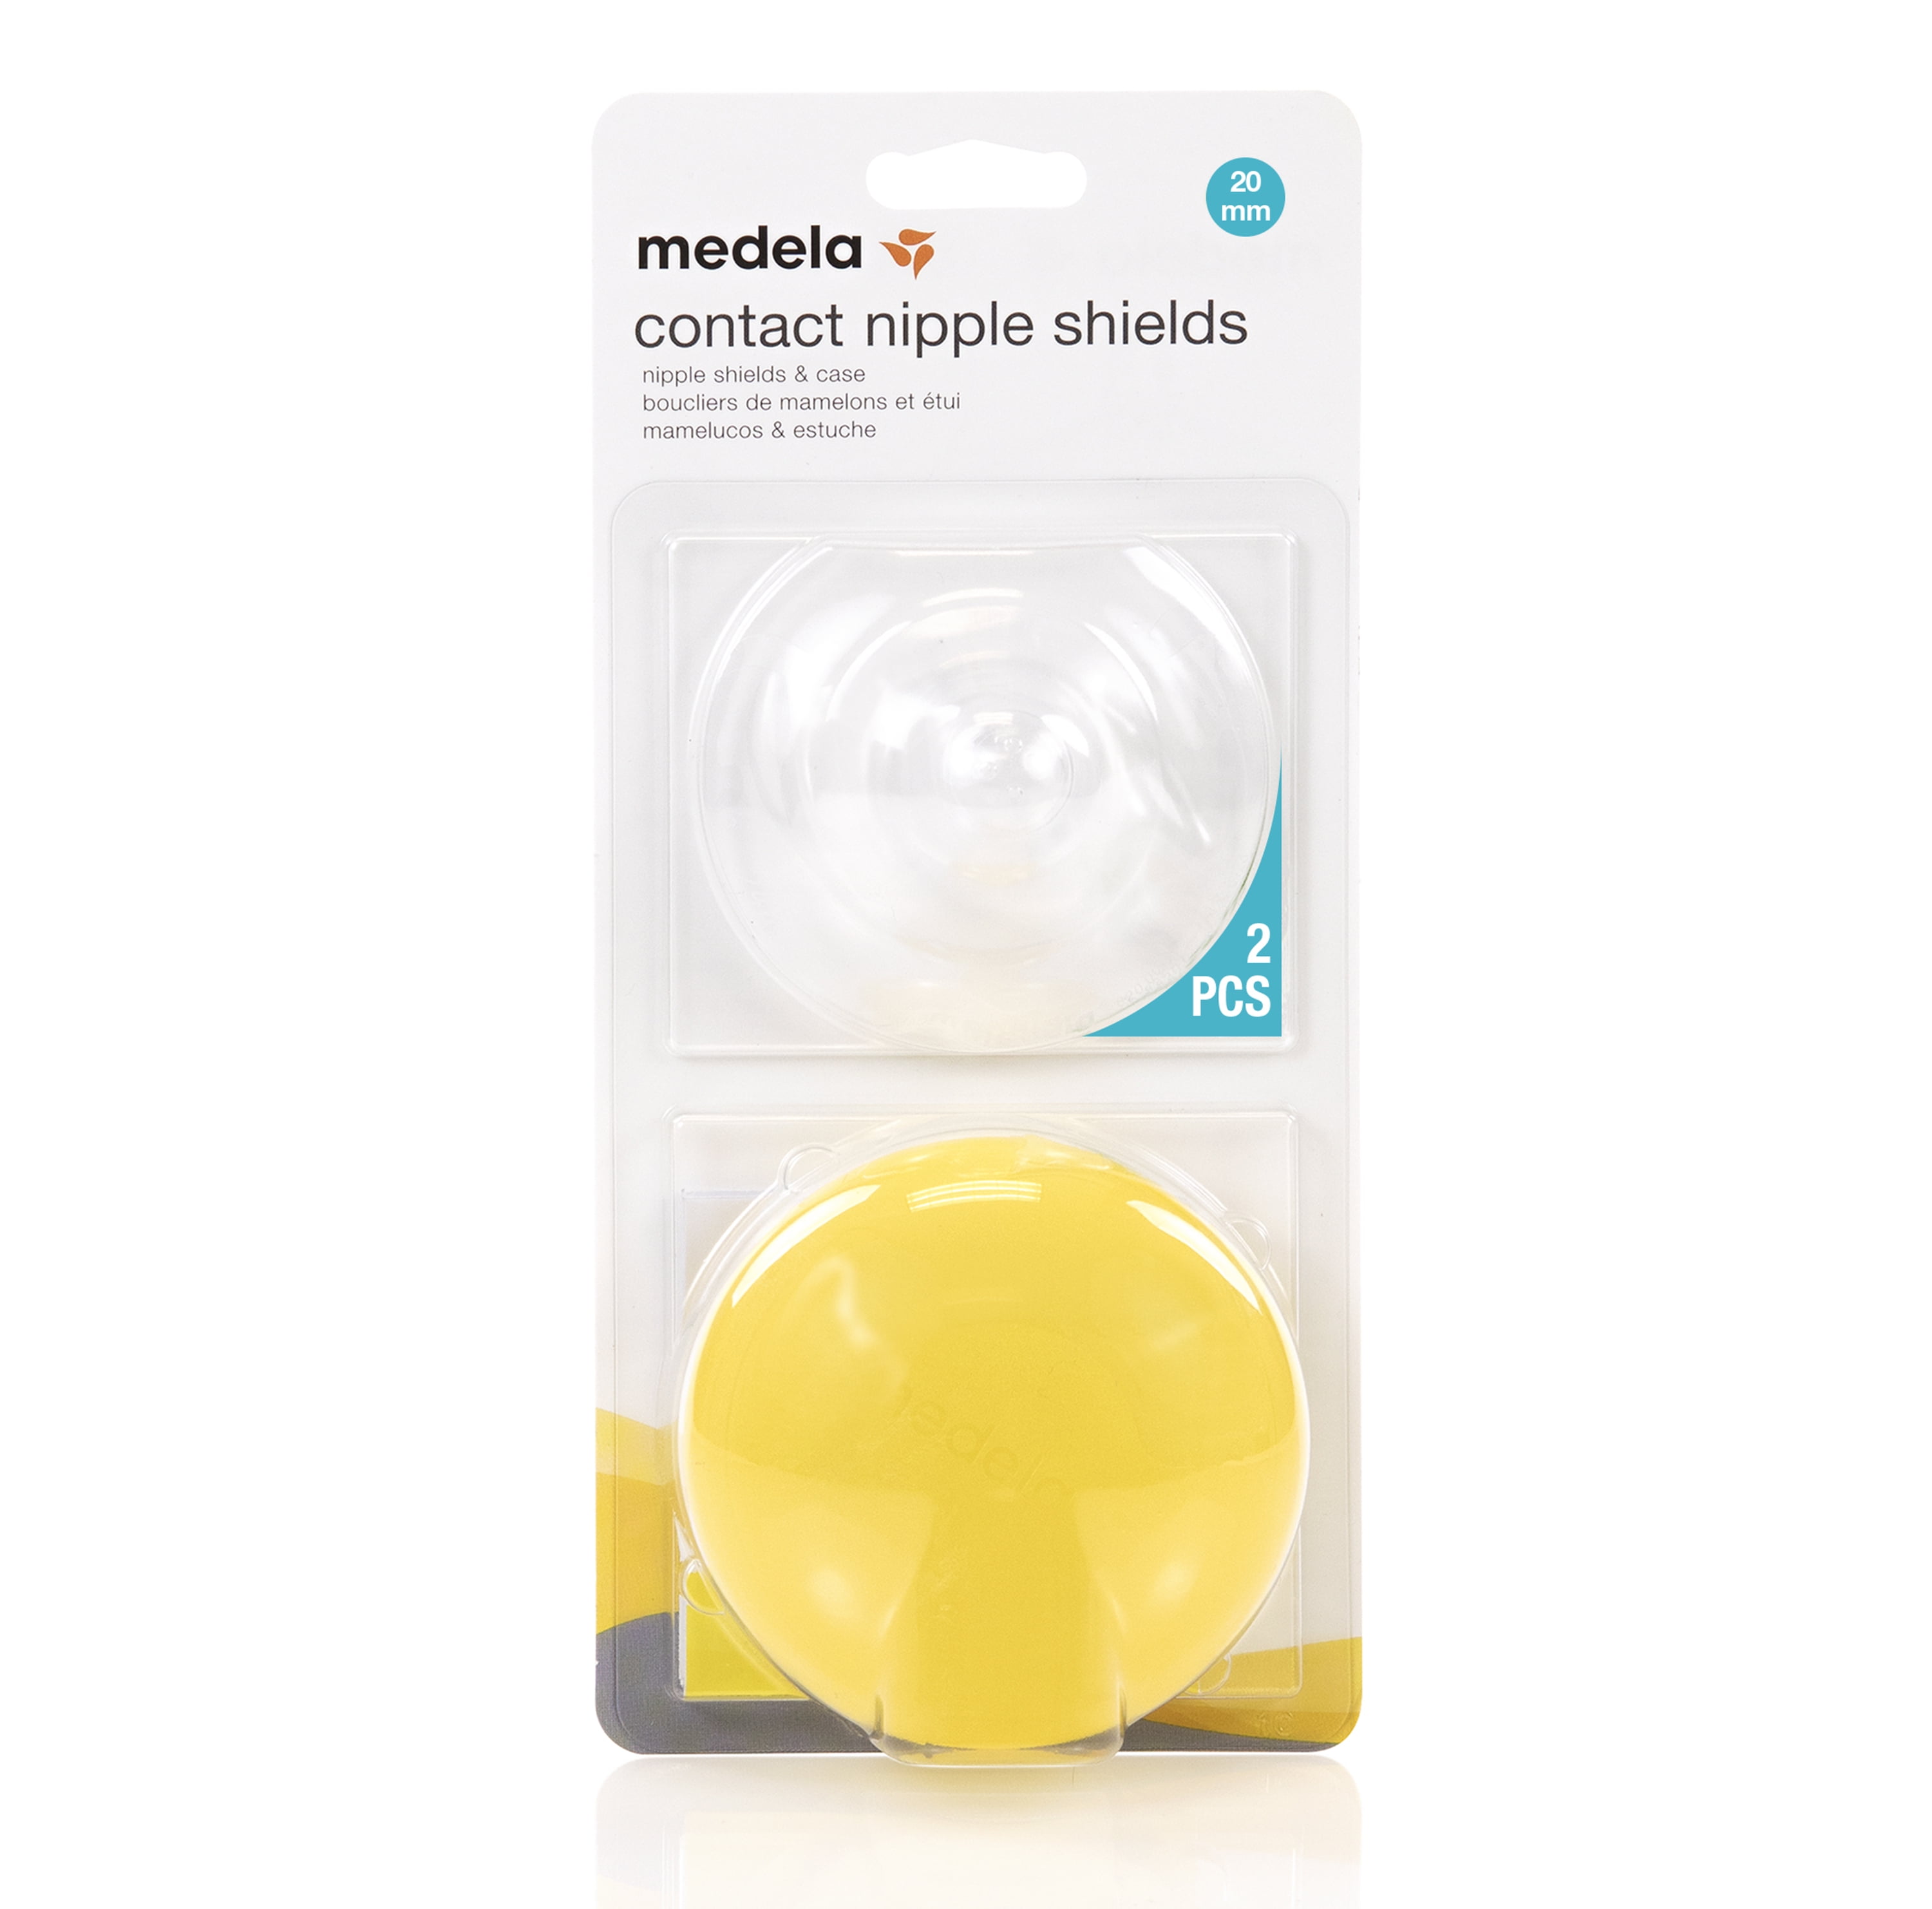 or 24 mm NEW MEDELA SEALED CONTACT NIPPLE SHIELD 16 20 Authentic! 